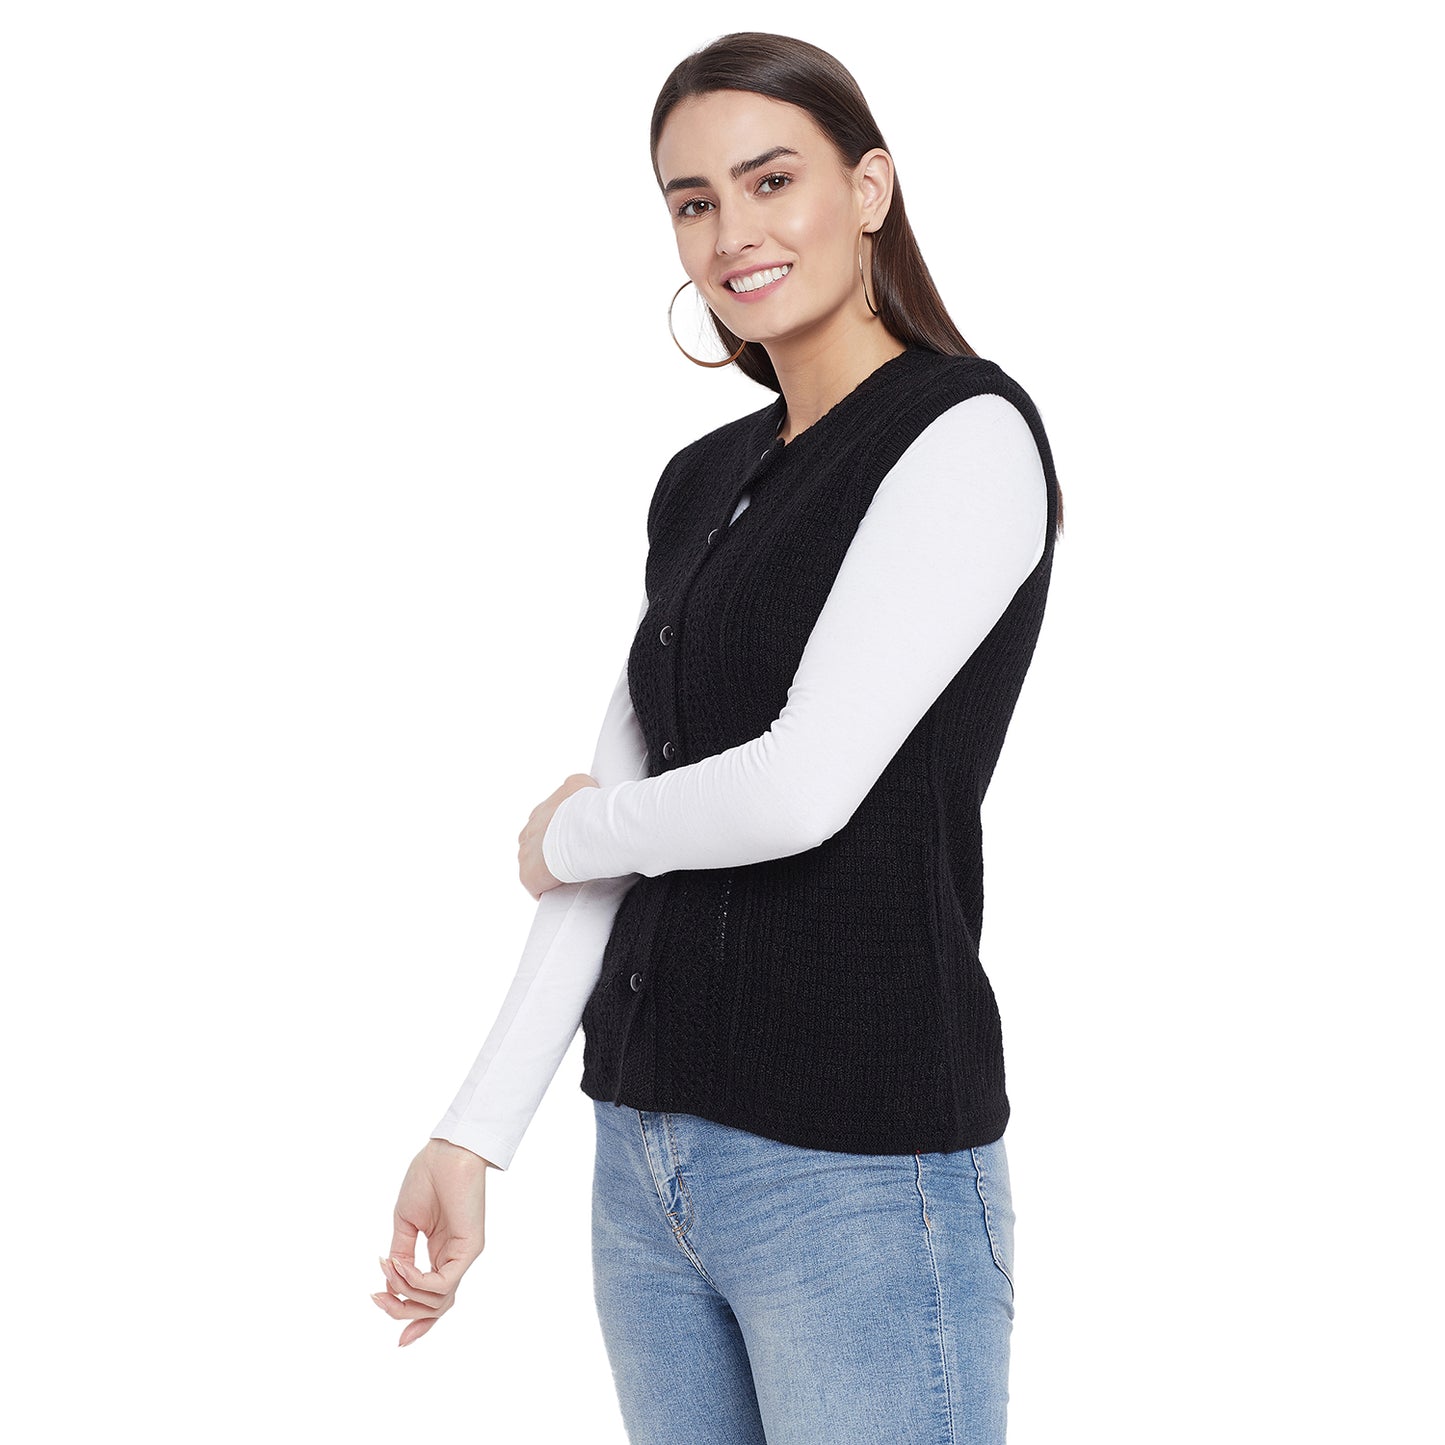 Clapton Acrylic Blend Round Neck Full Sleeve Casual Solid Winter Wear Cardigans For Women Grey